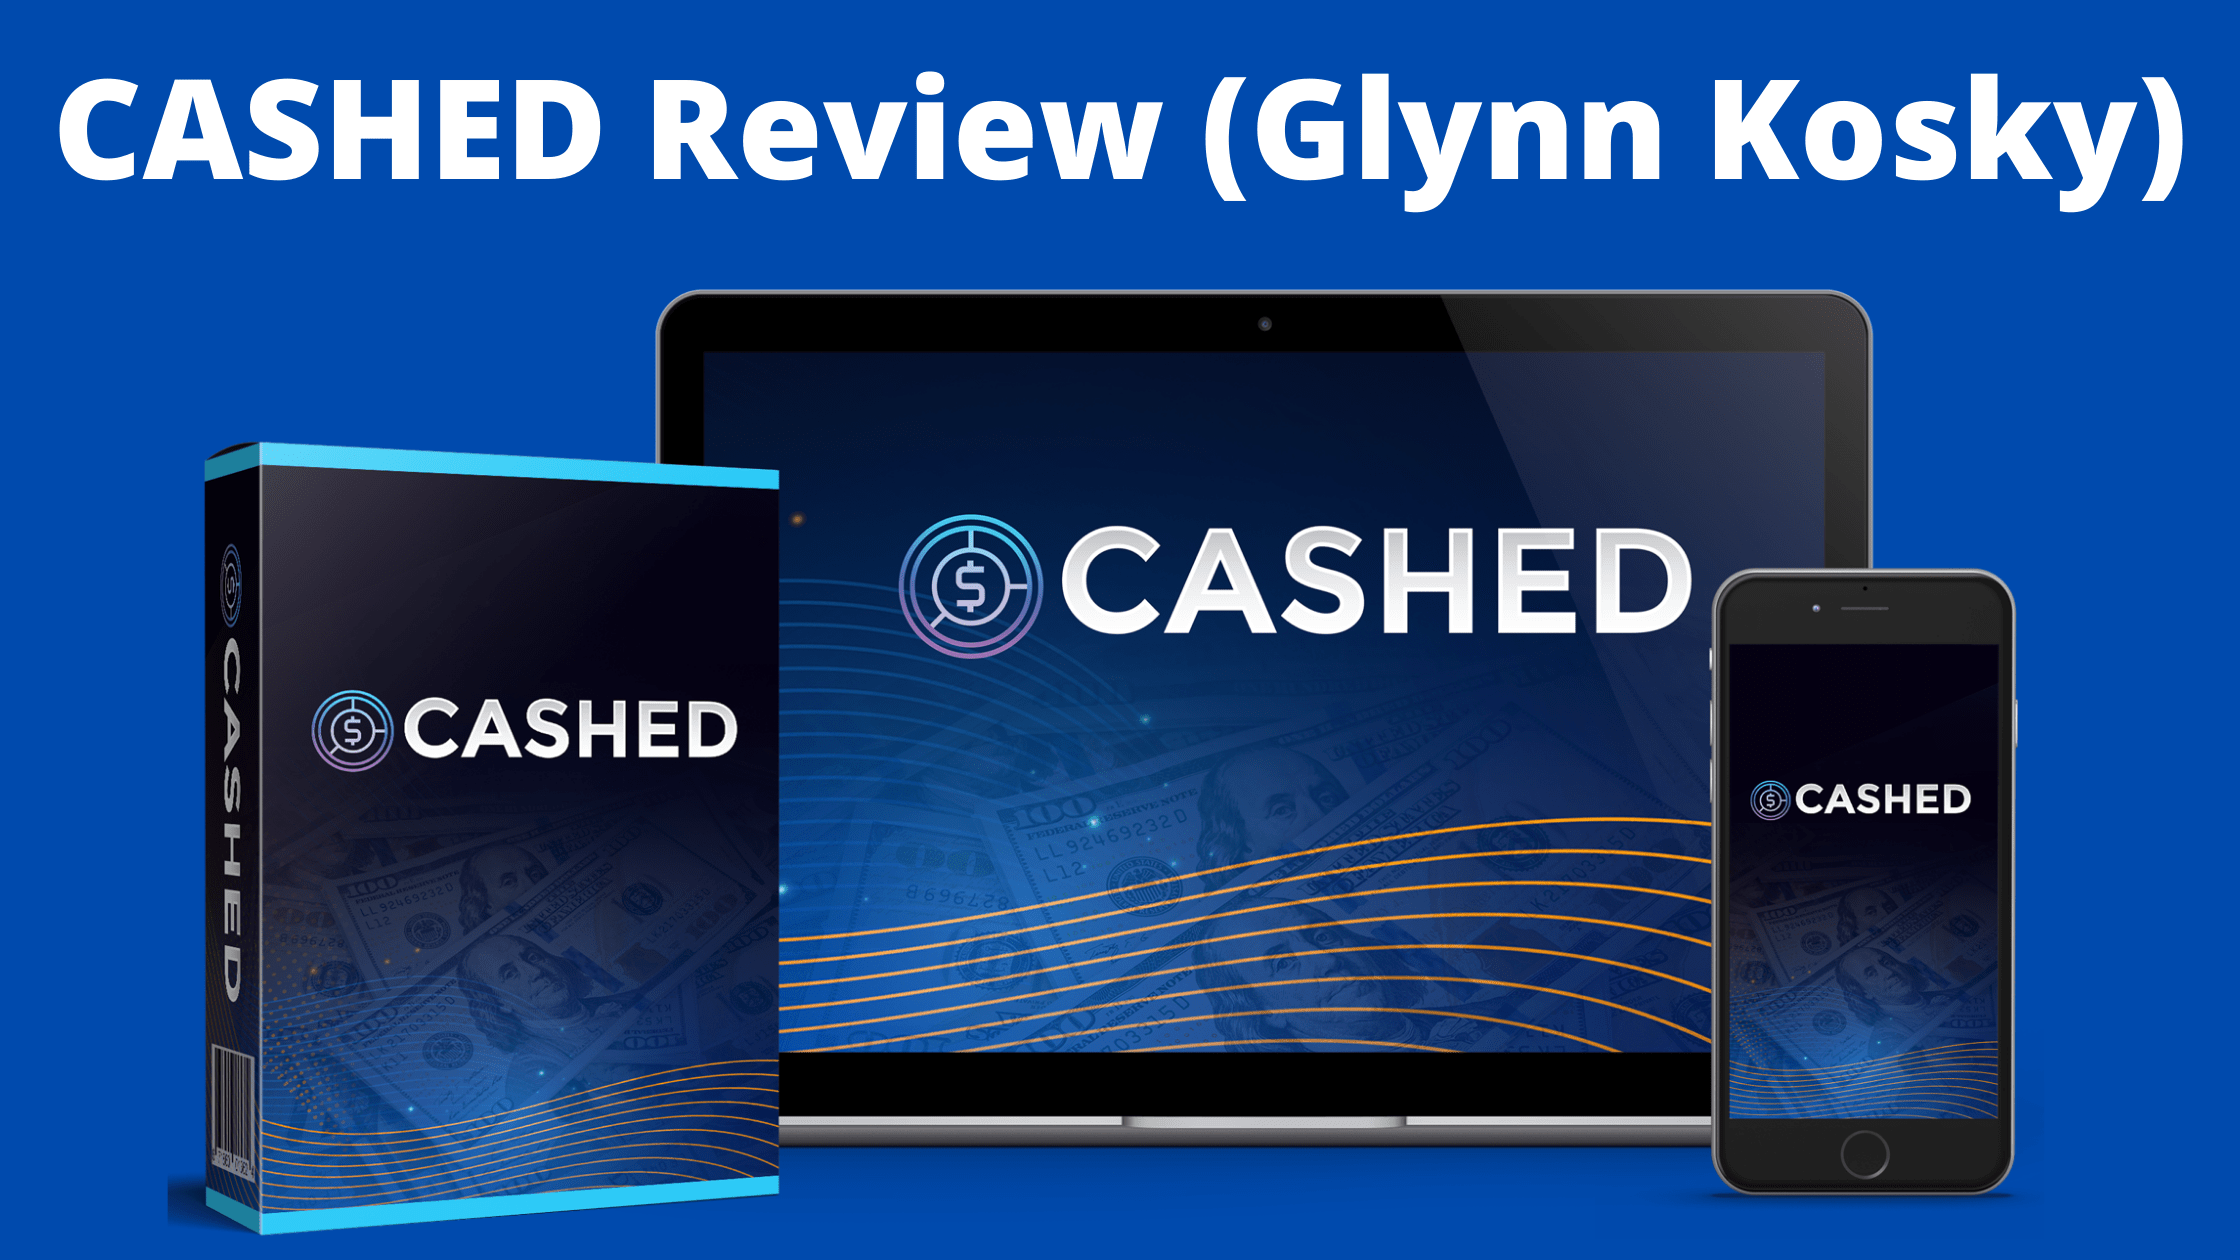 CASHED Review (Glynn Kosky)